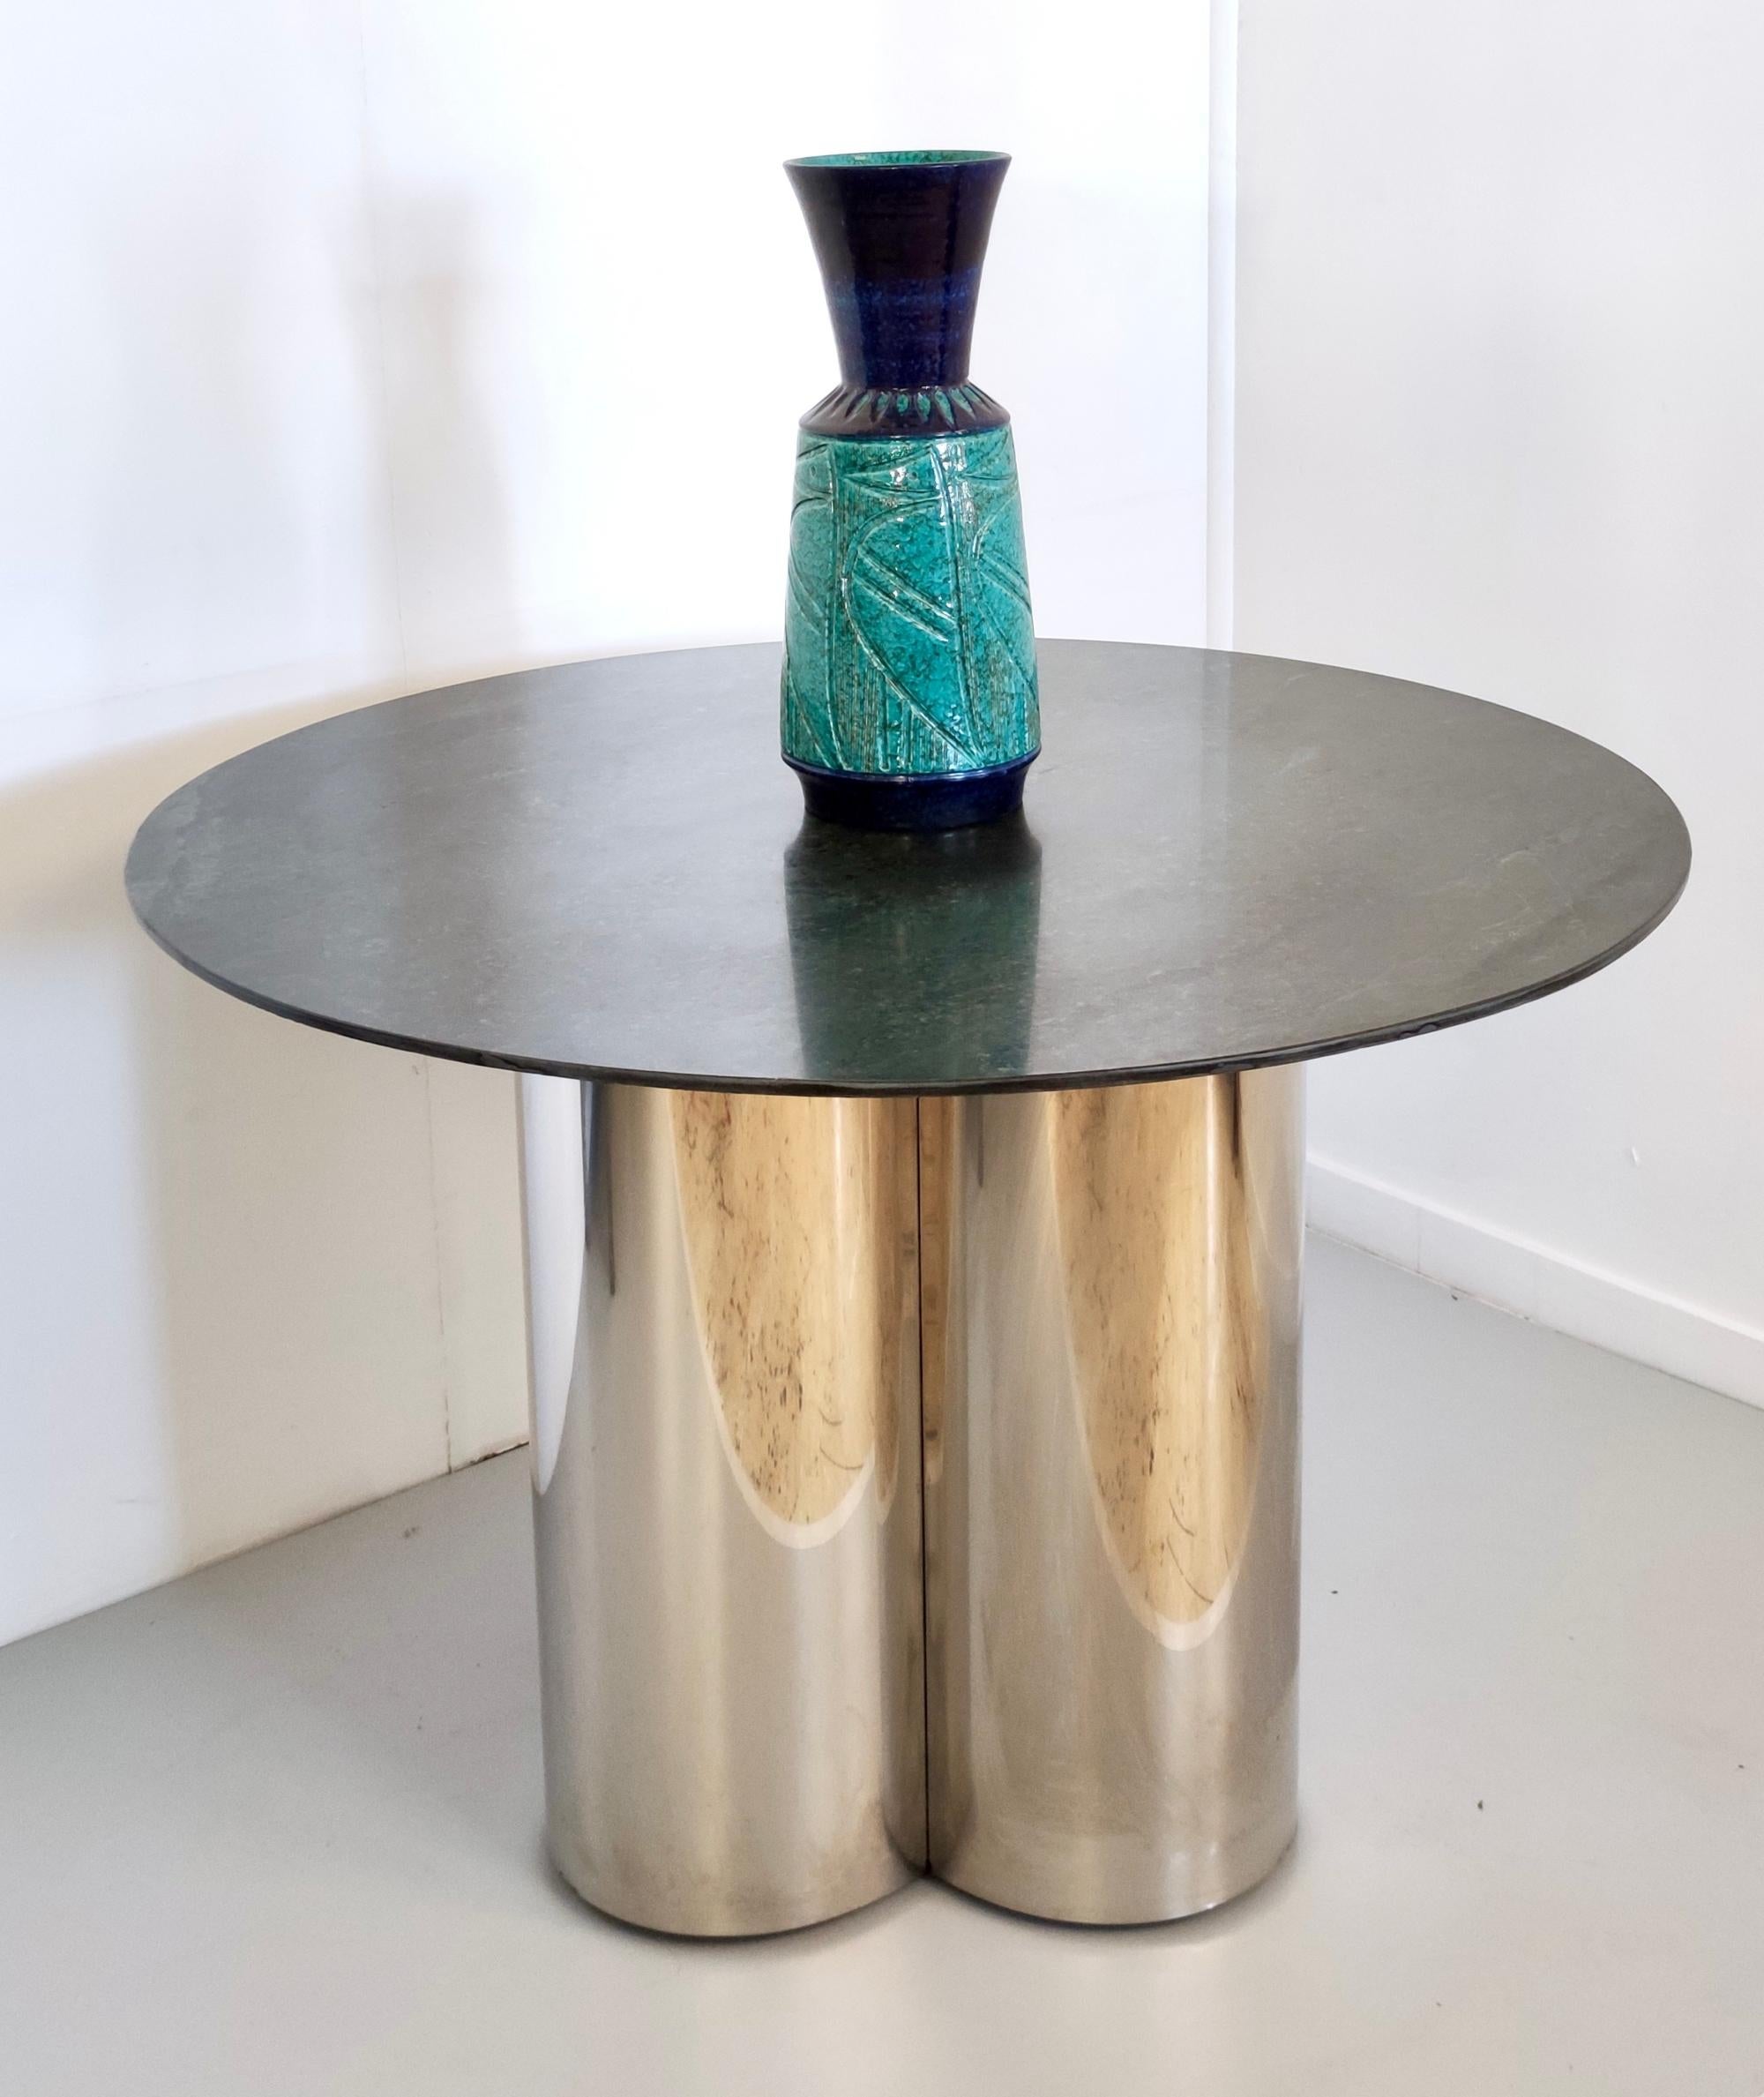 Made in Italy, 1970s. 
This table features a steel pedestal and a green marble top.  
It is a vintage item therefore it might show slight traces of use, but it is in excellent original condition and ready to become a piece in a home.

Measures: